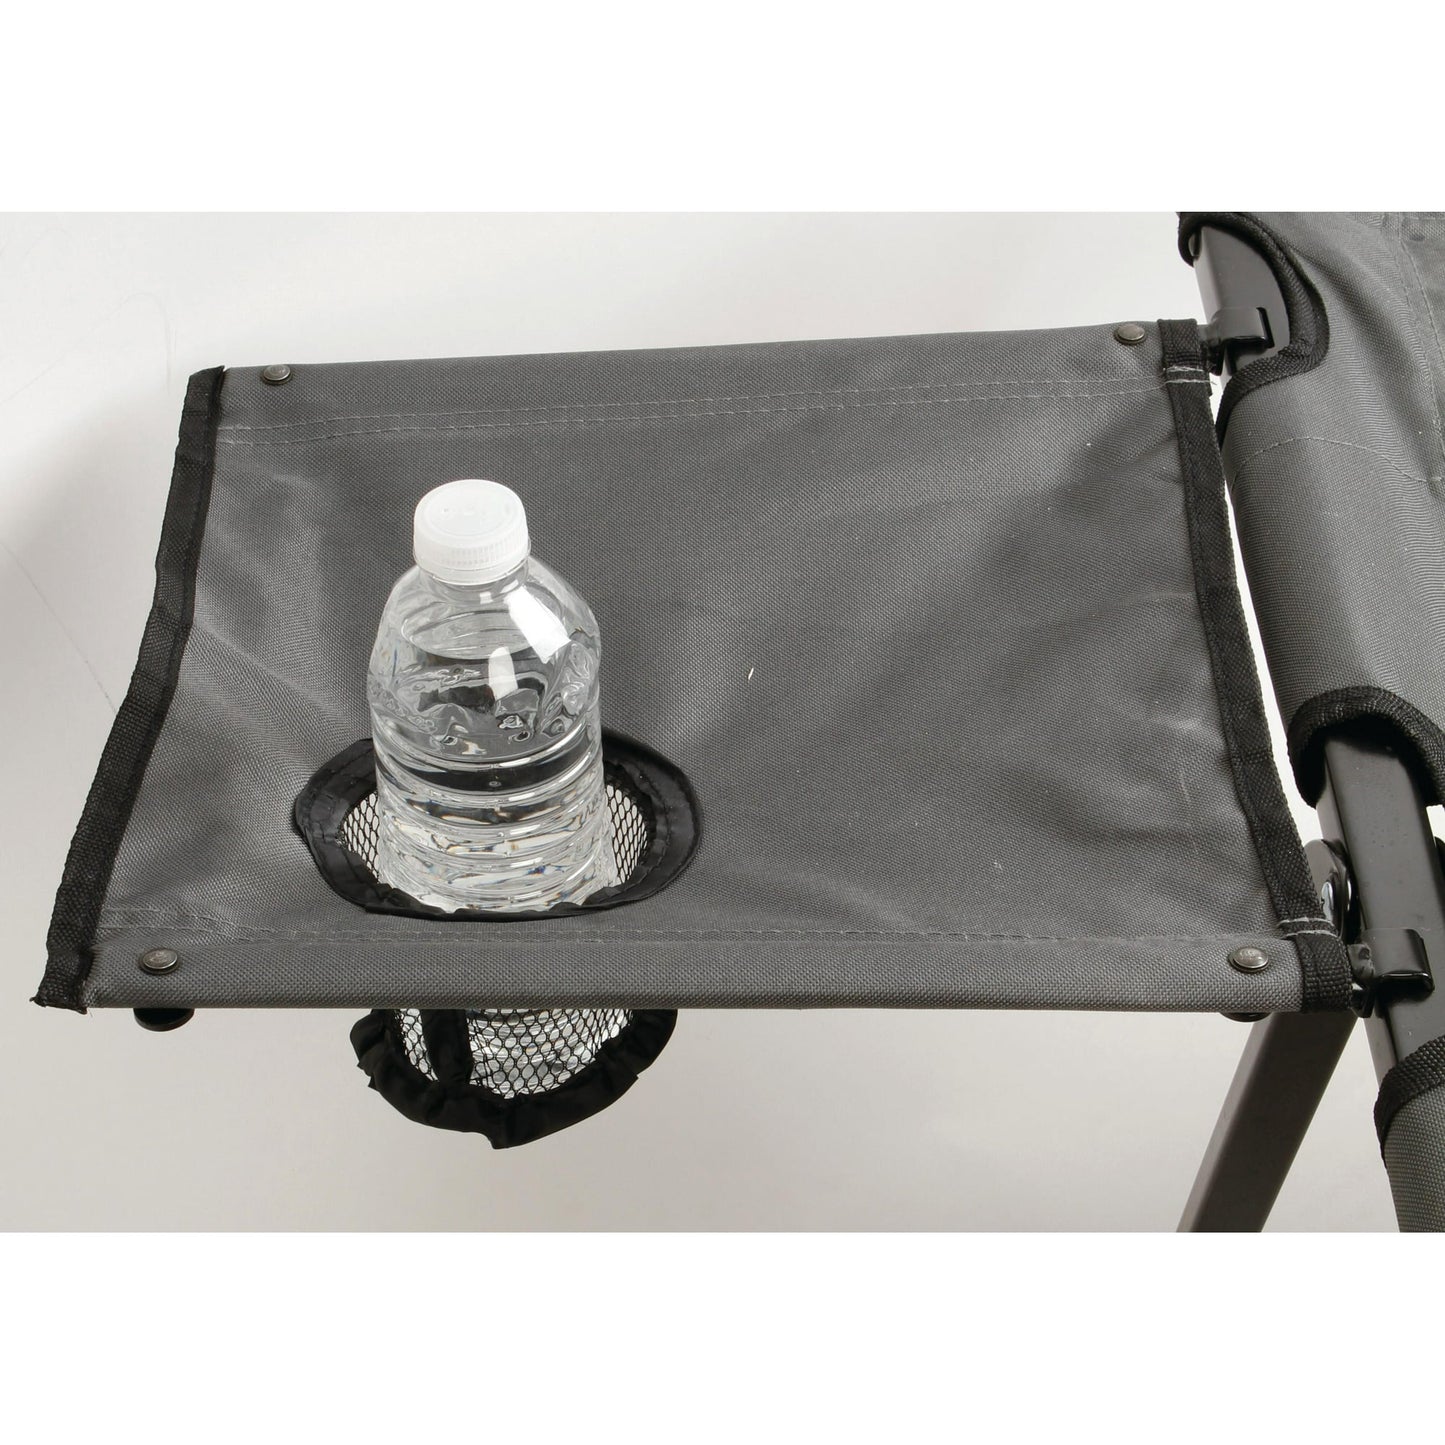 Pack-Away Camping Cot with Side Table